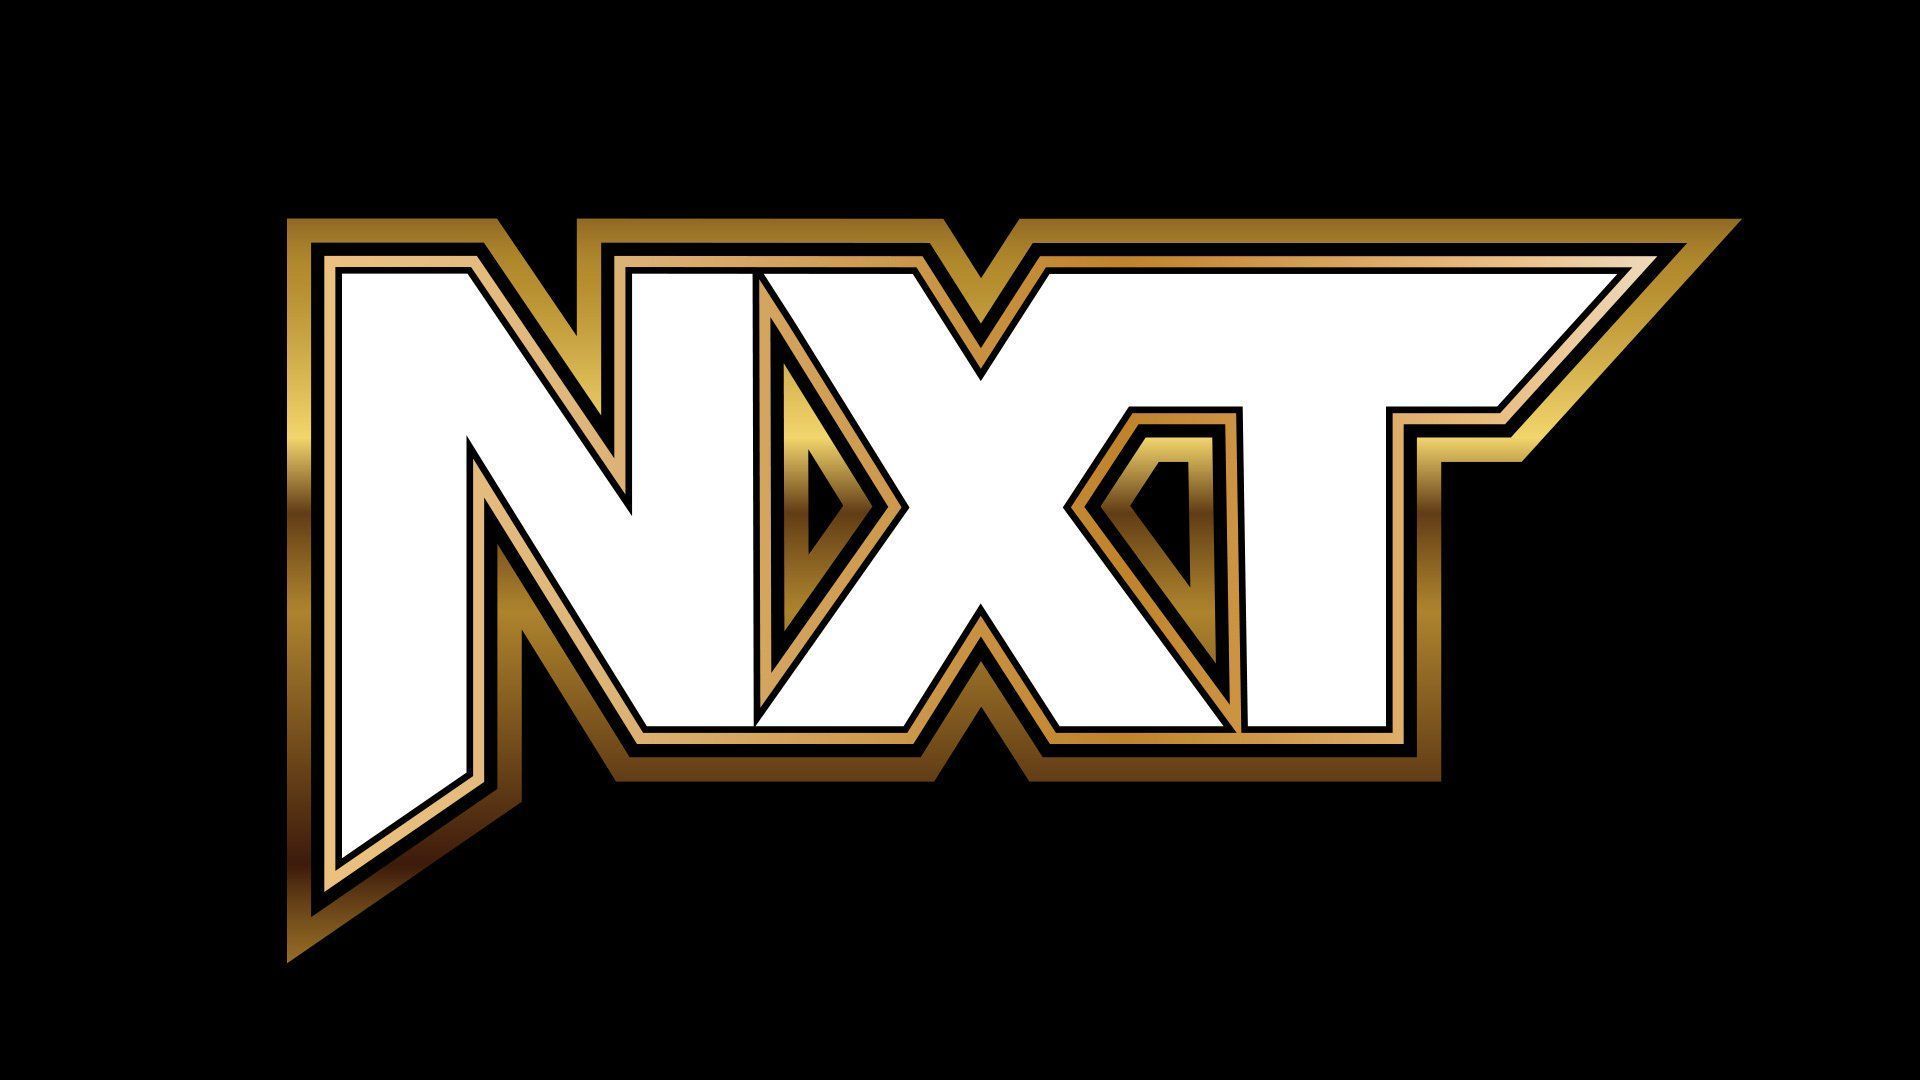 The new NXT logo